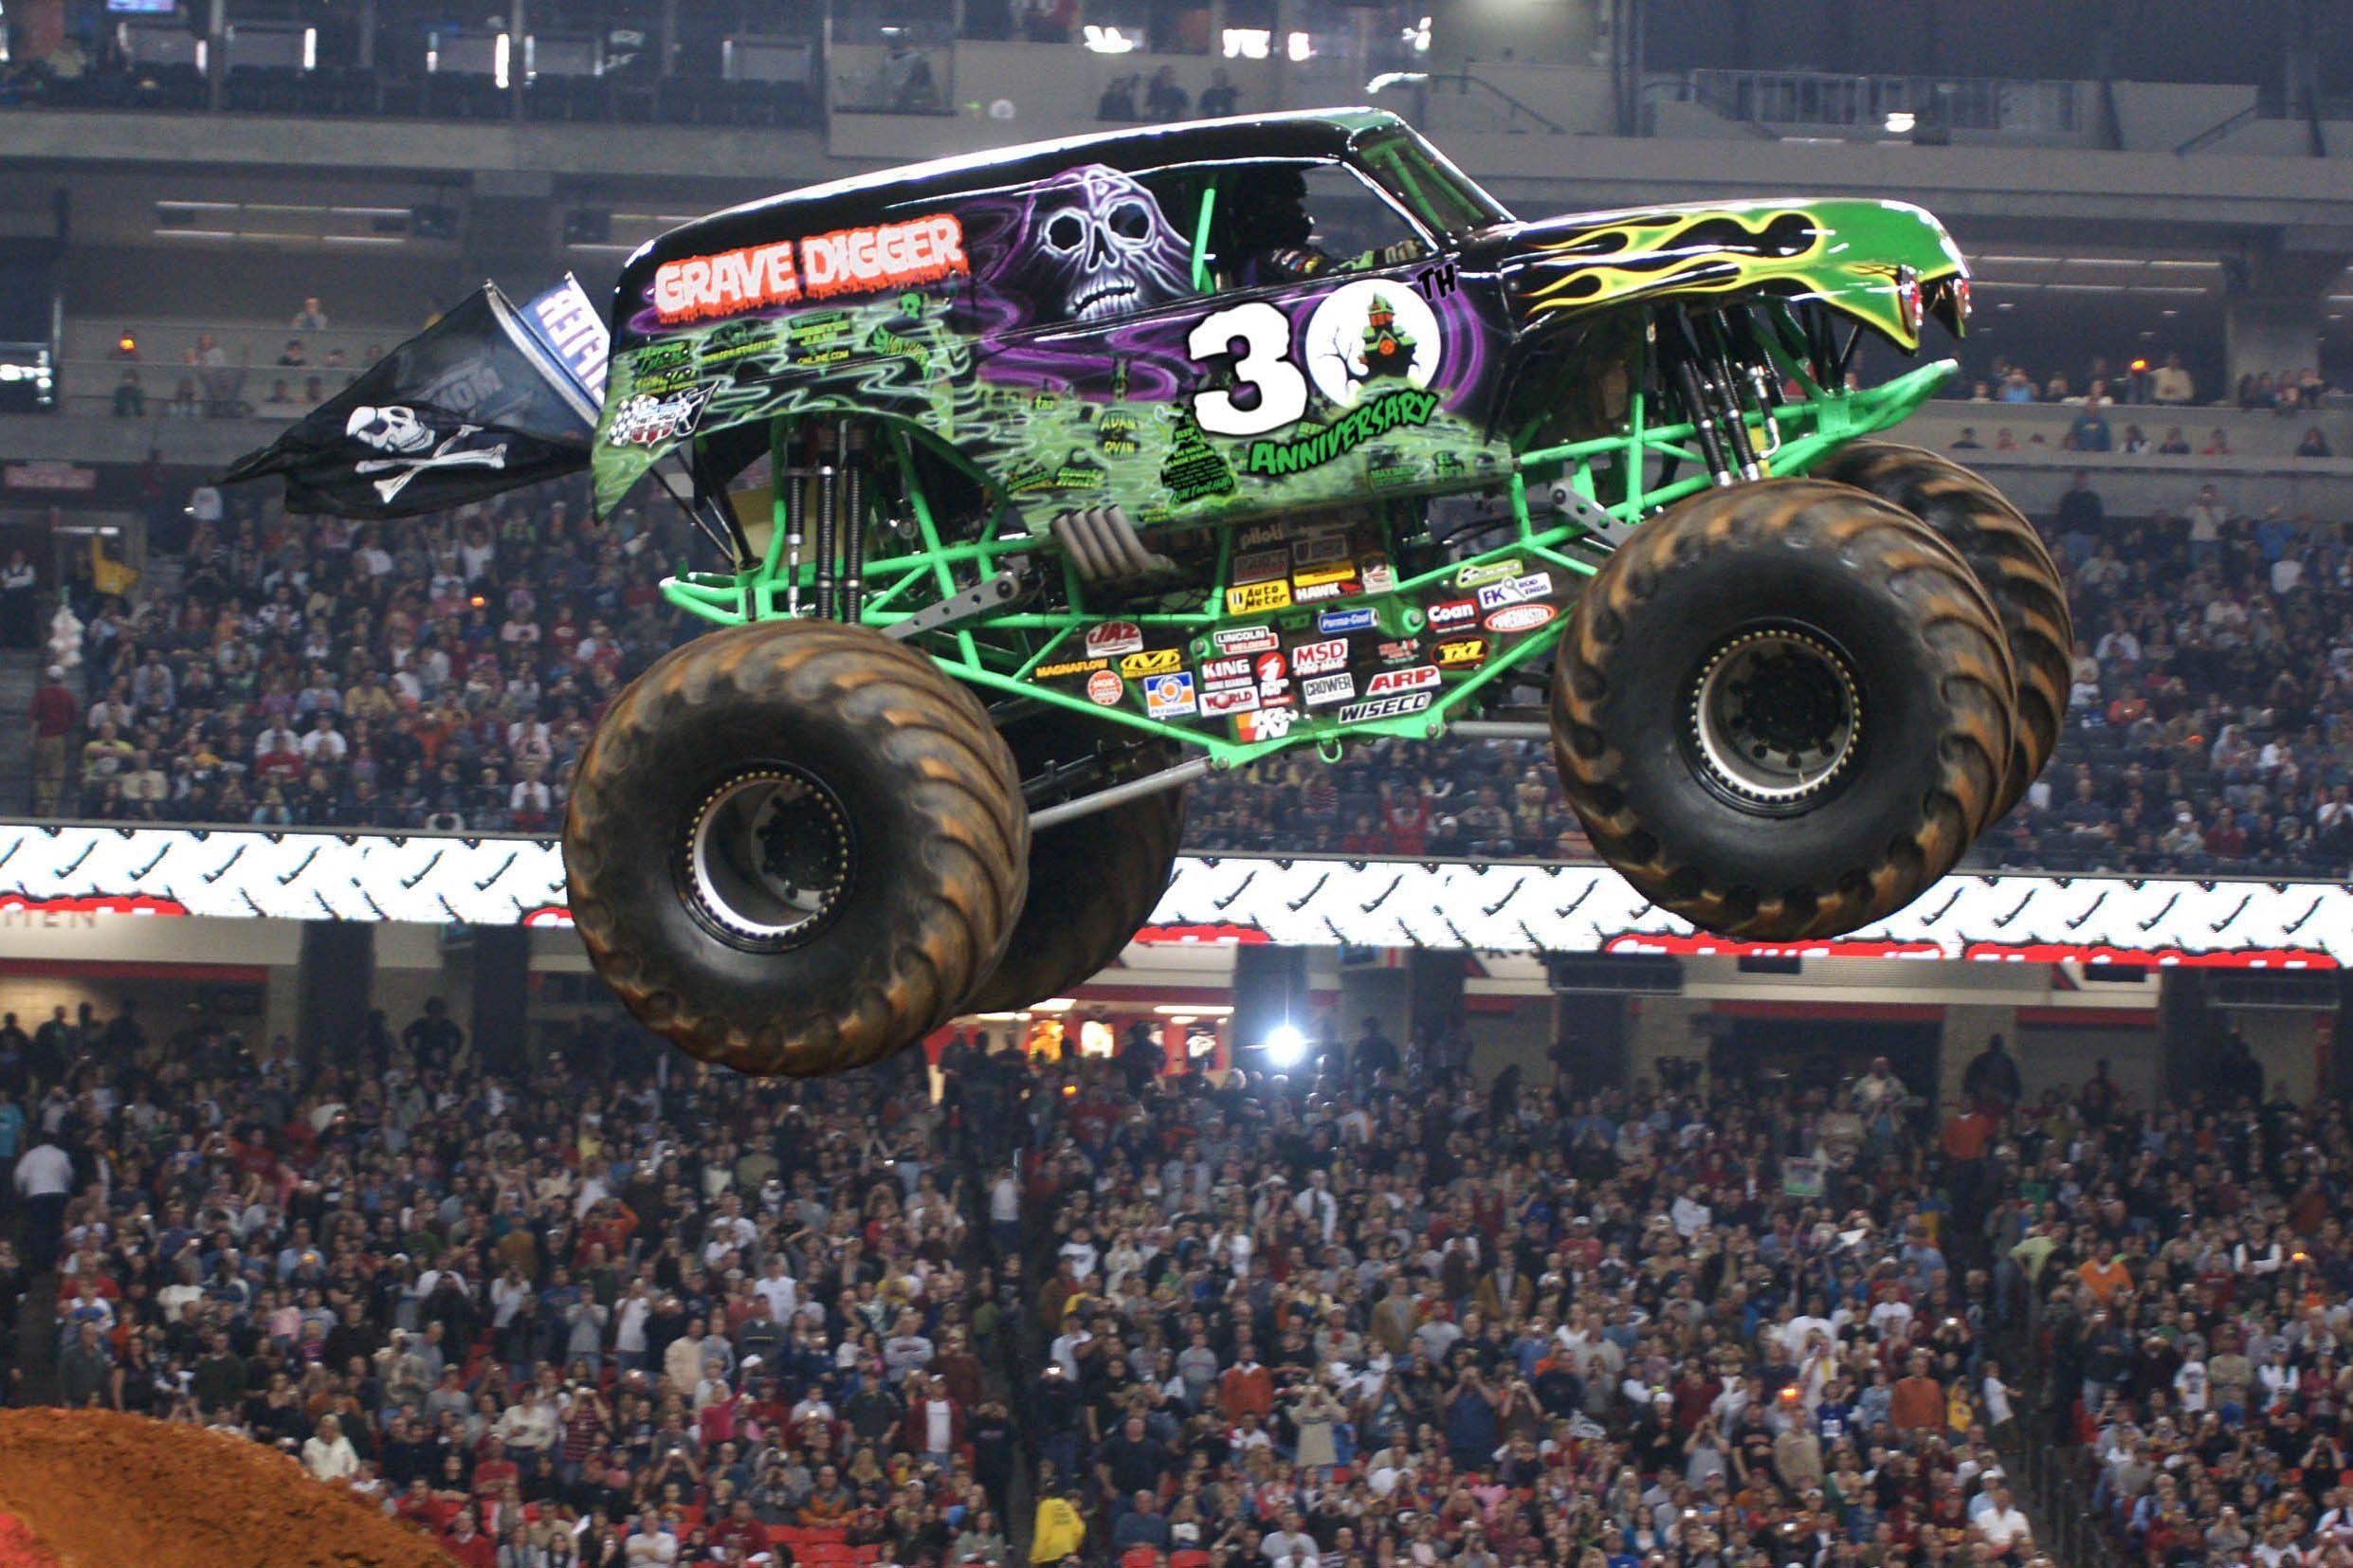 Grave Digger Monster Truck 4x4 Race Racing Wallpapers For Mobile